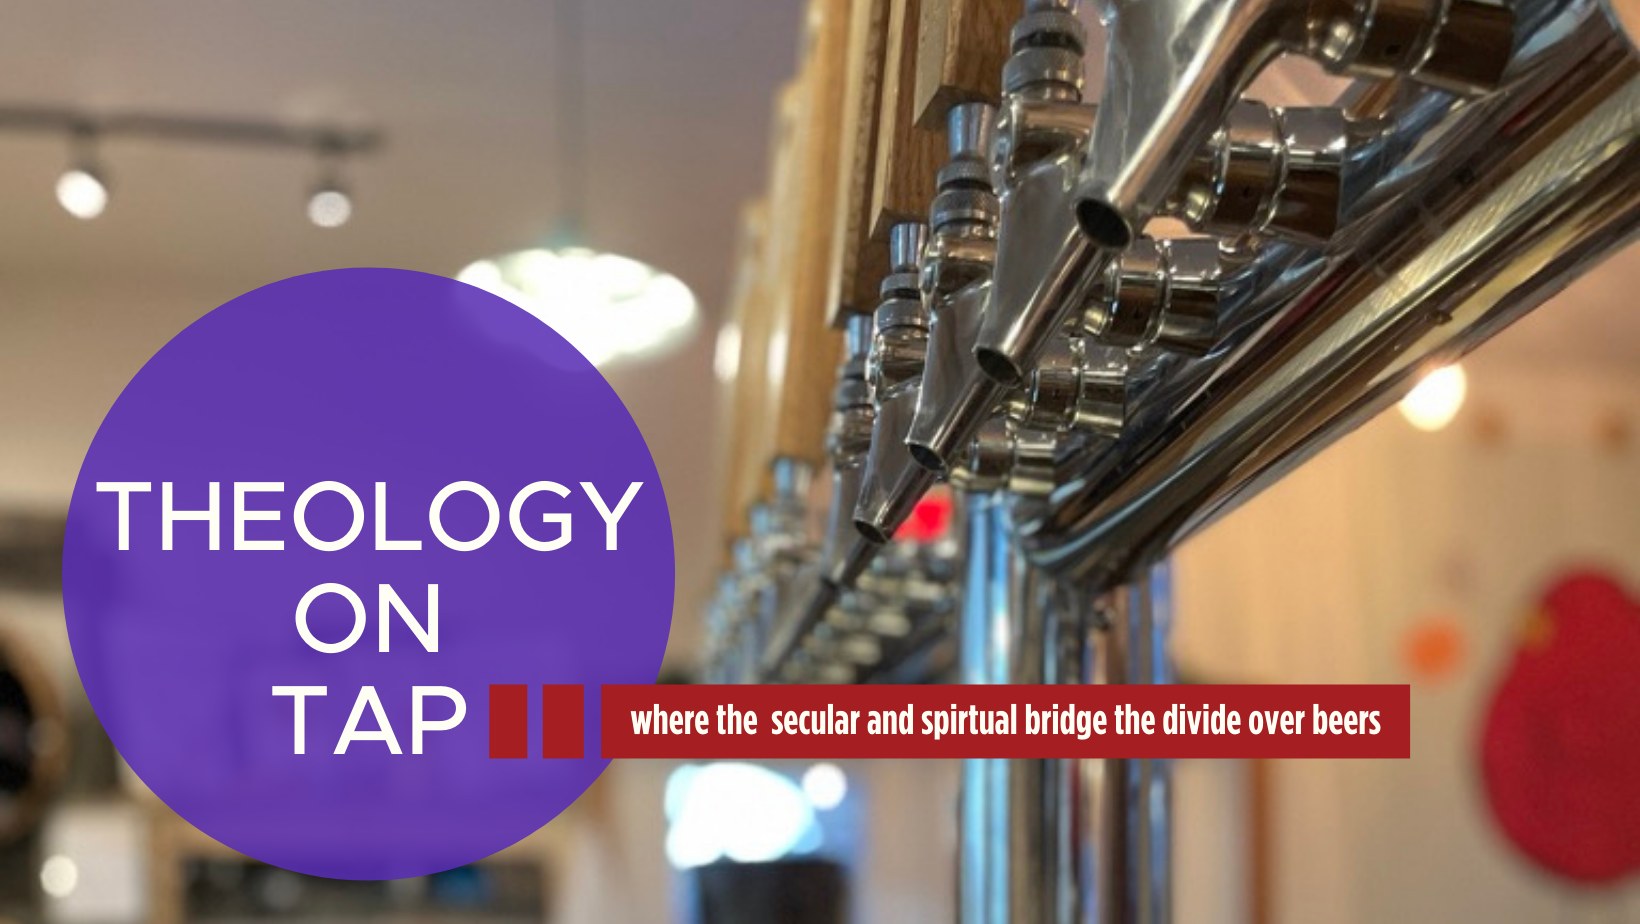 Featured image for “Theology on Tap”